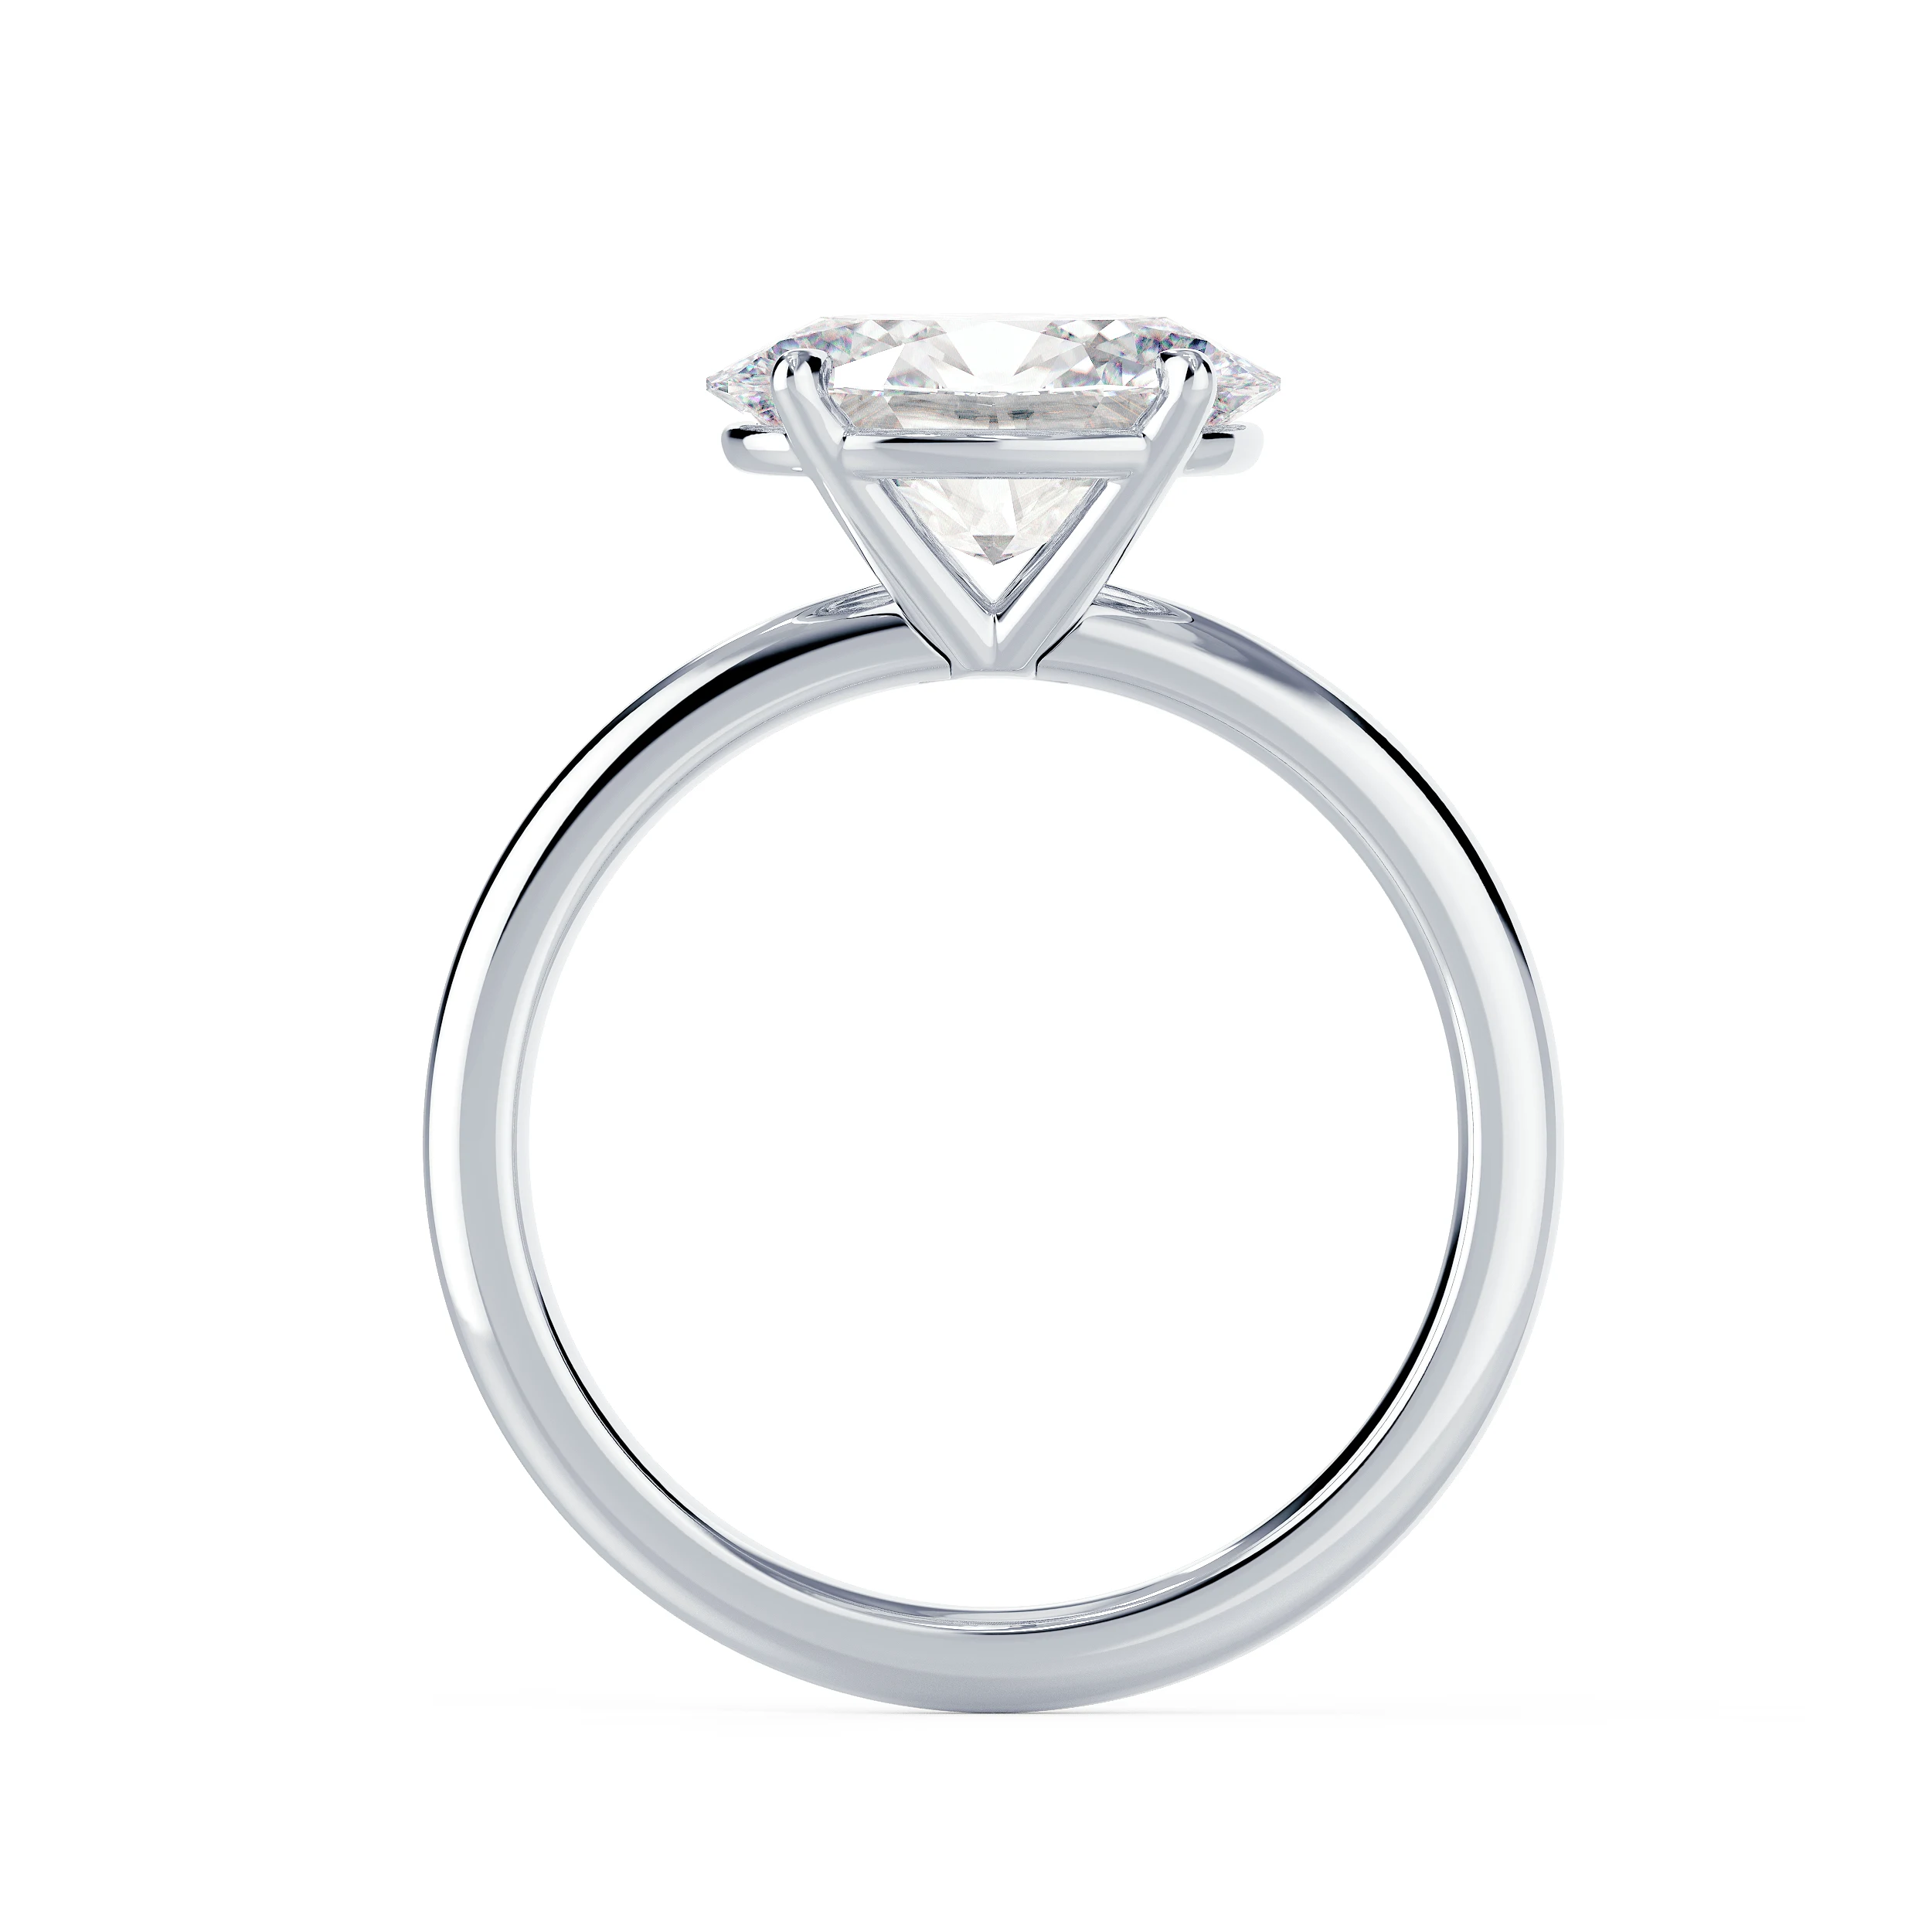 Synthetic Diamonds set in White Gold Oval East-West Solitaire Diamond Engagement Ring (Profile View)